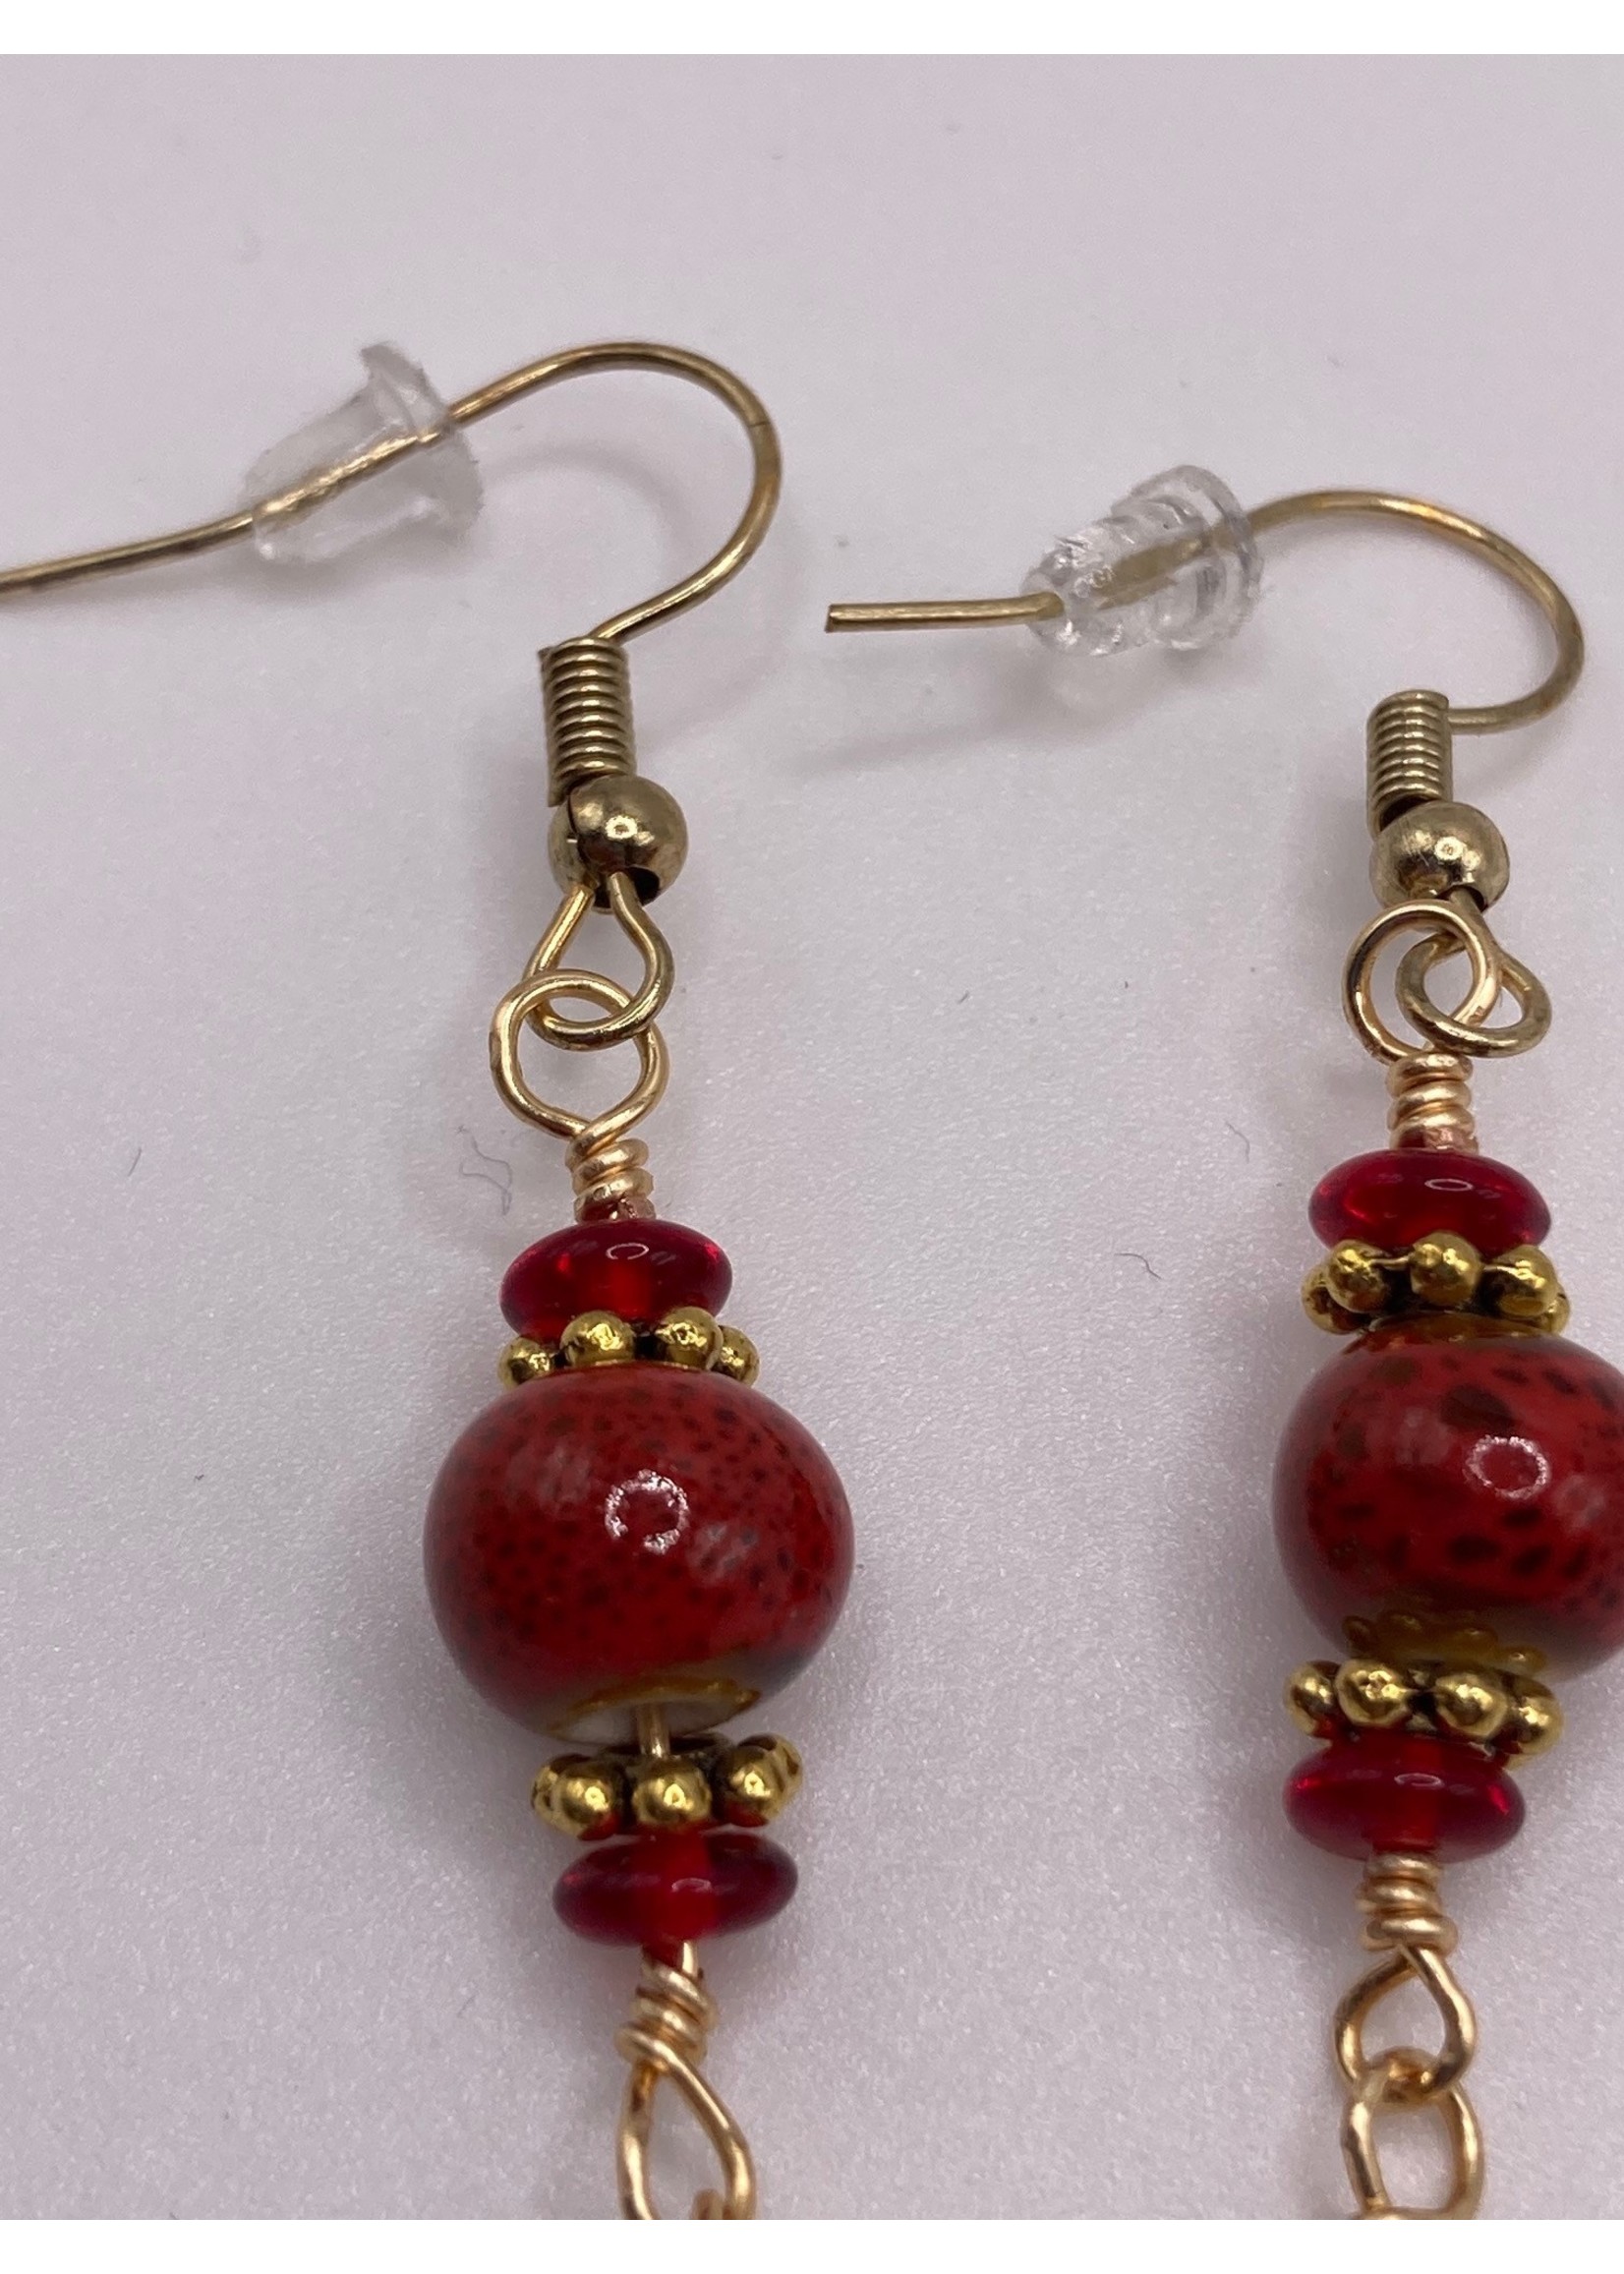 Our Twisted Dahlia Red Carnelian Drop with Ceramic Bead with Gold Wire Wrapping and Accent Earrings